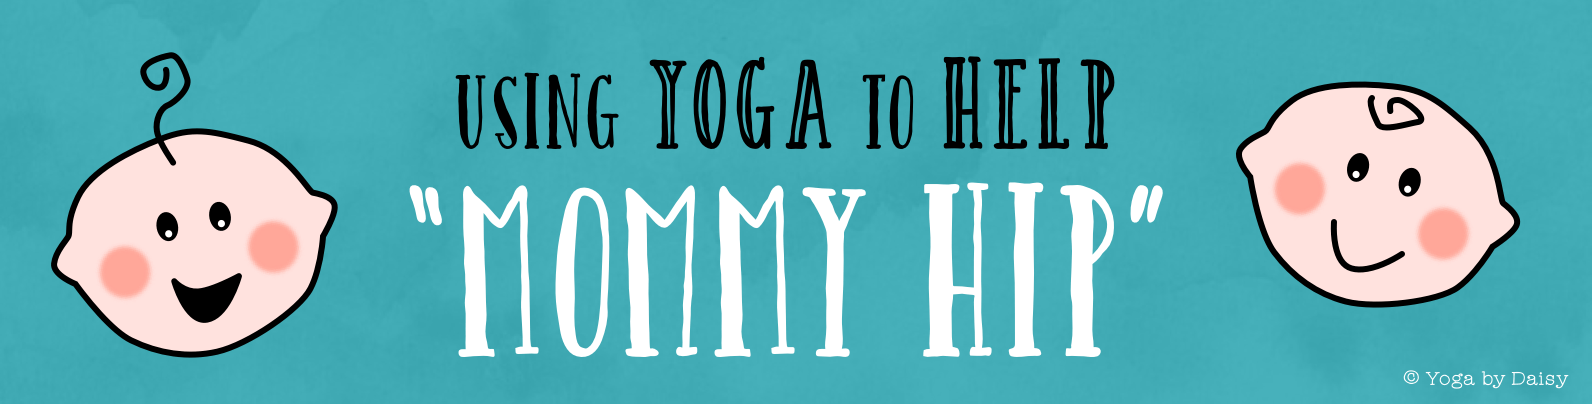 Using Yoga to Help Mommy Hip